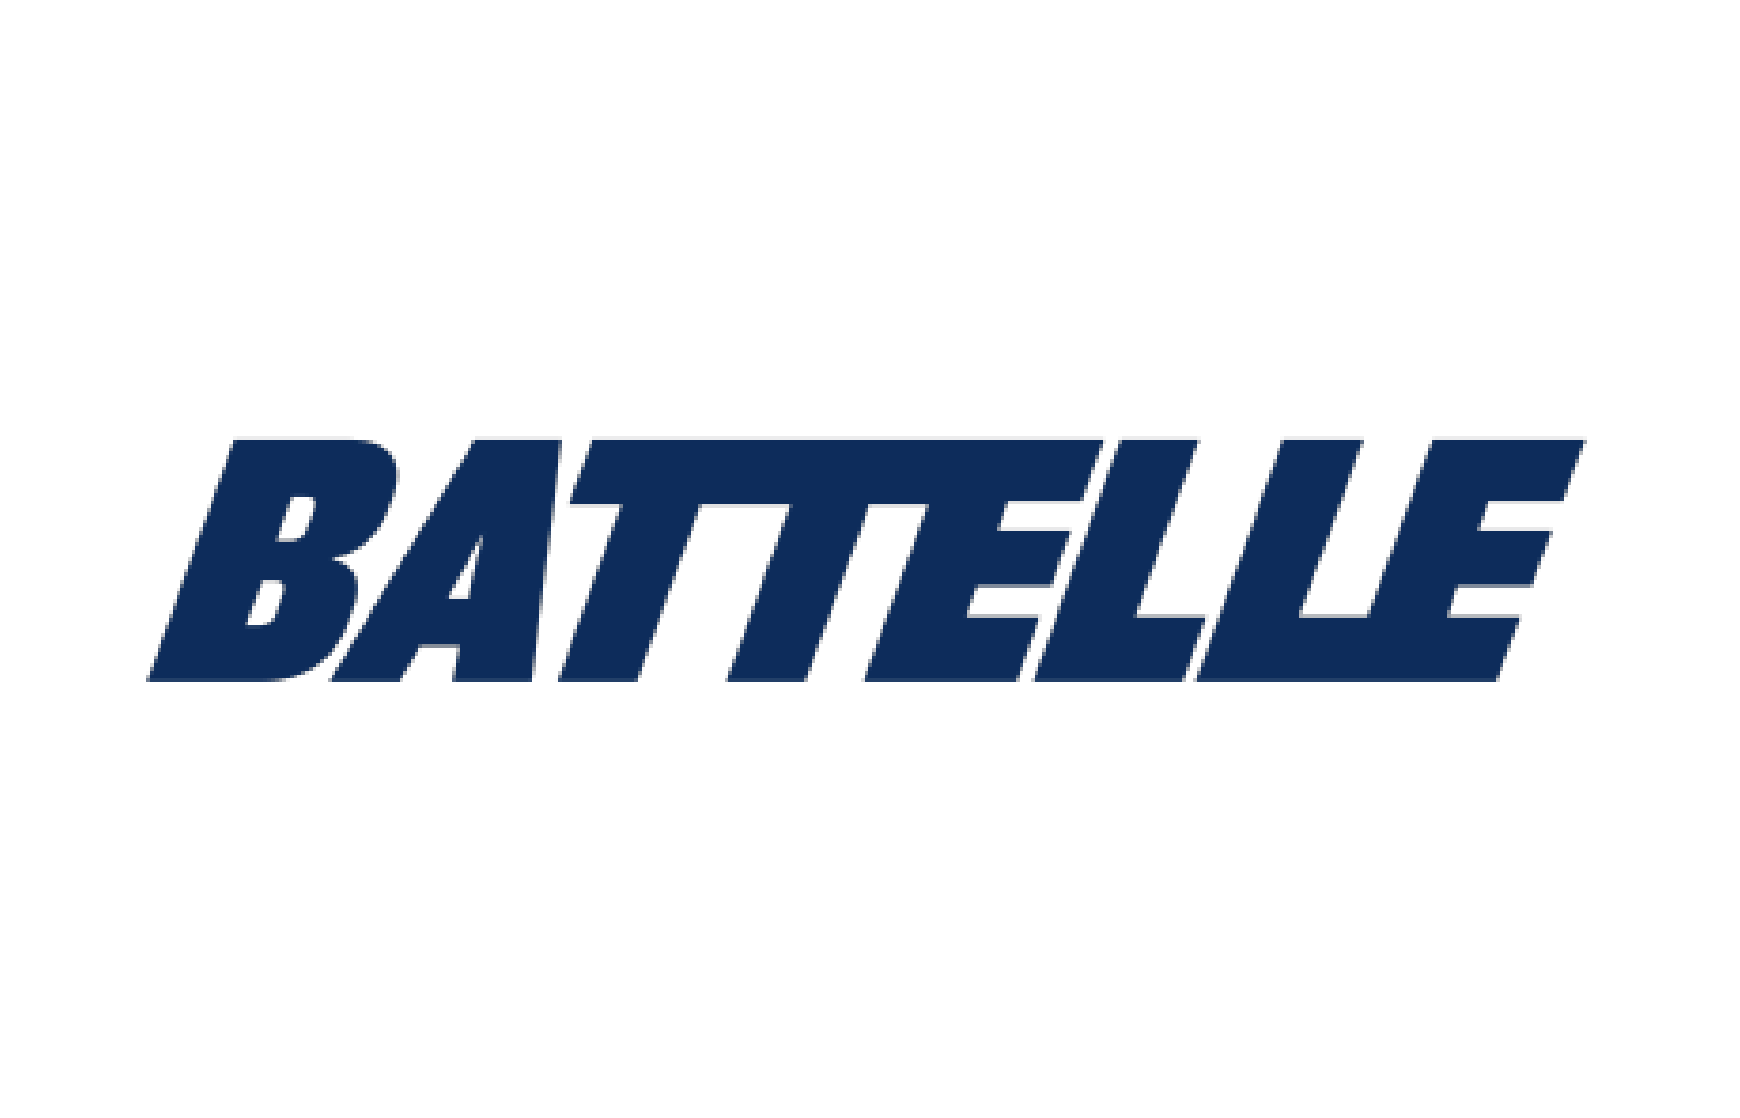 Logo of the company Battele who is a client of Precision Talent Solutions.